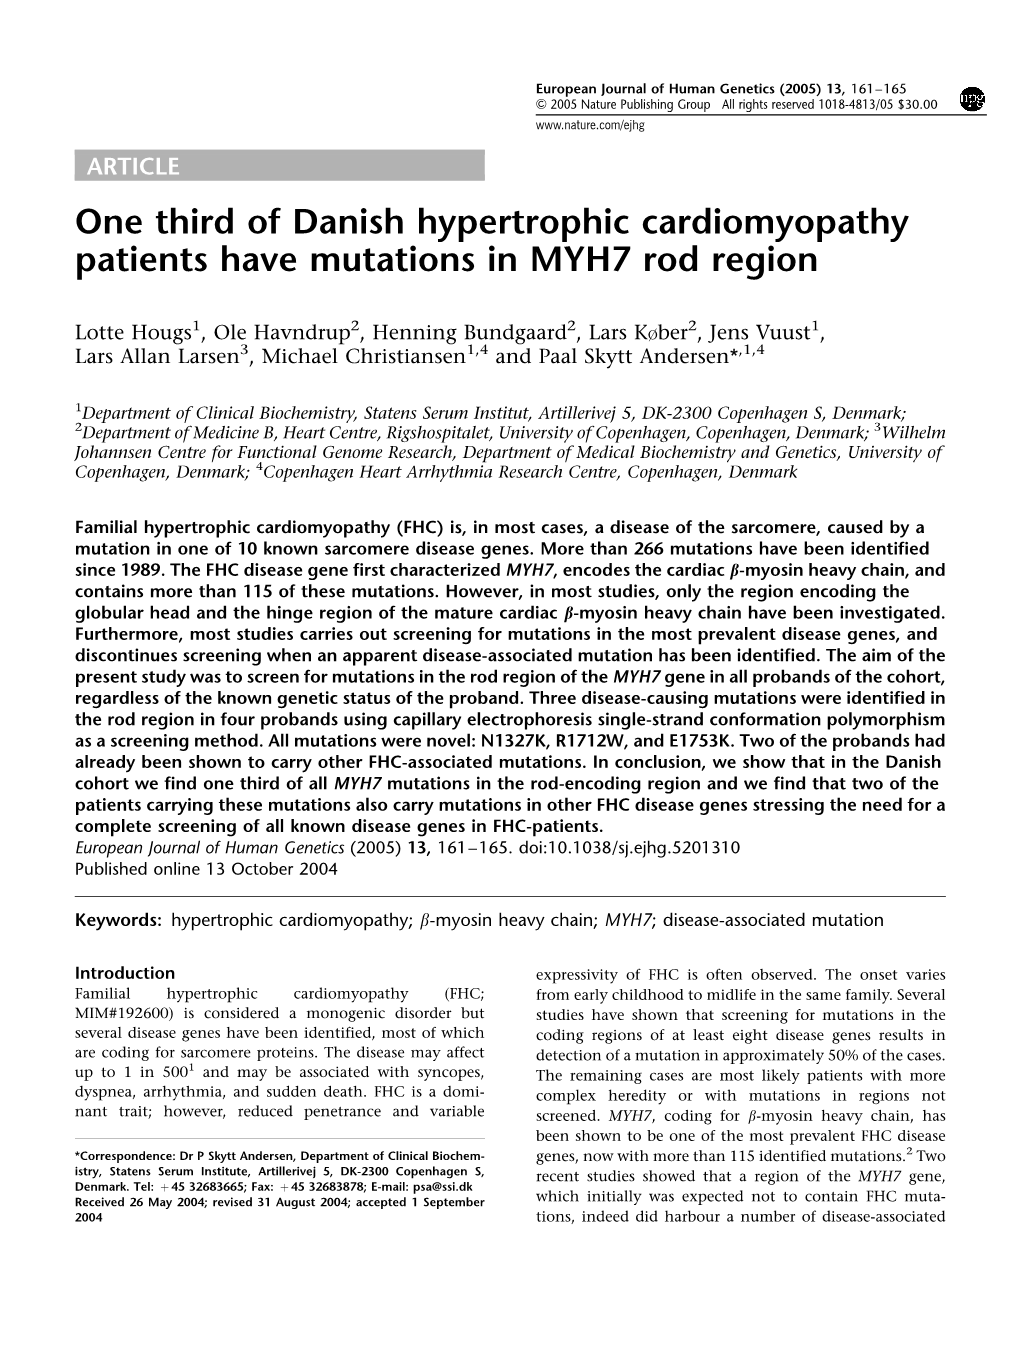 One Third of Danish Hypertrophic Cardiomyopathy Patients Have Mutations in MYH7 Rod Region